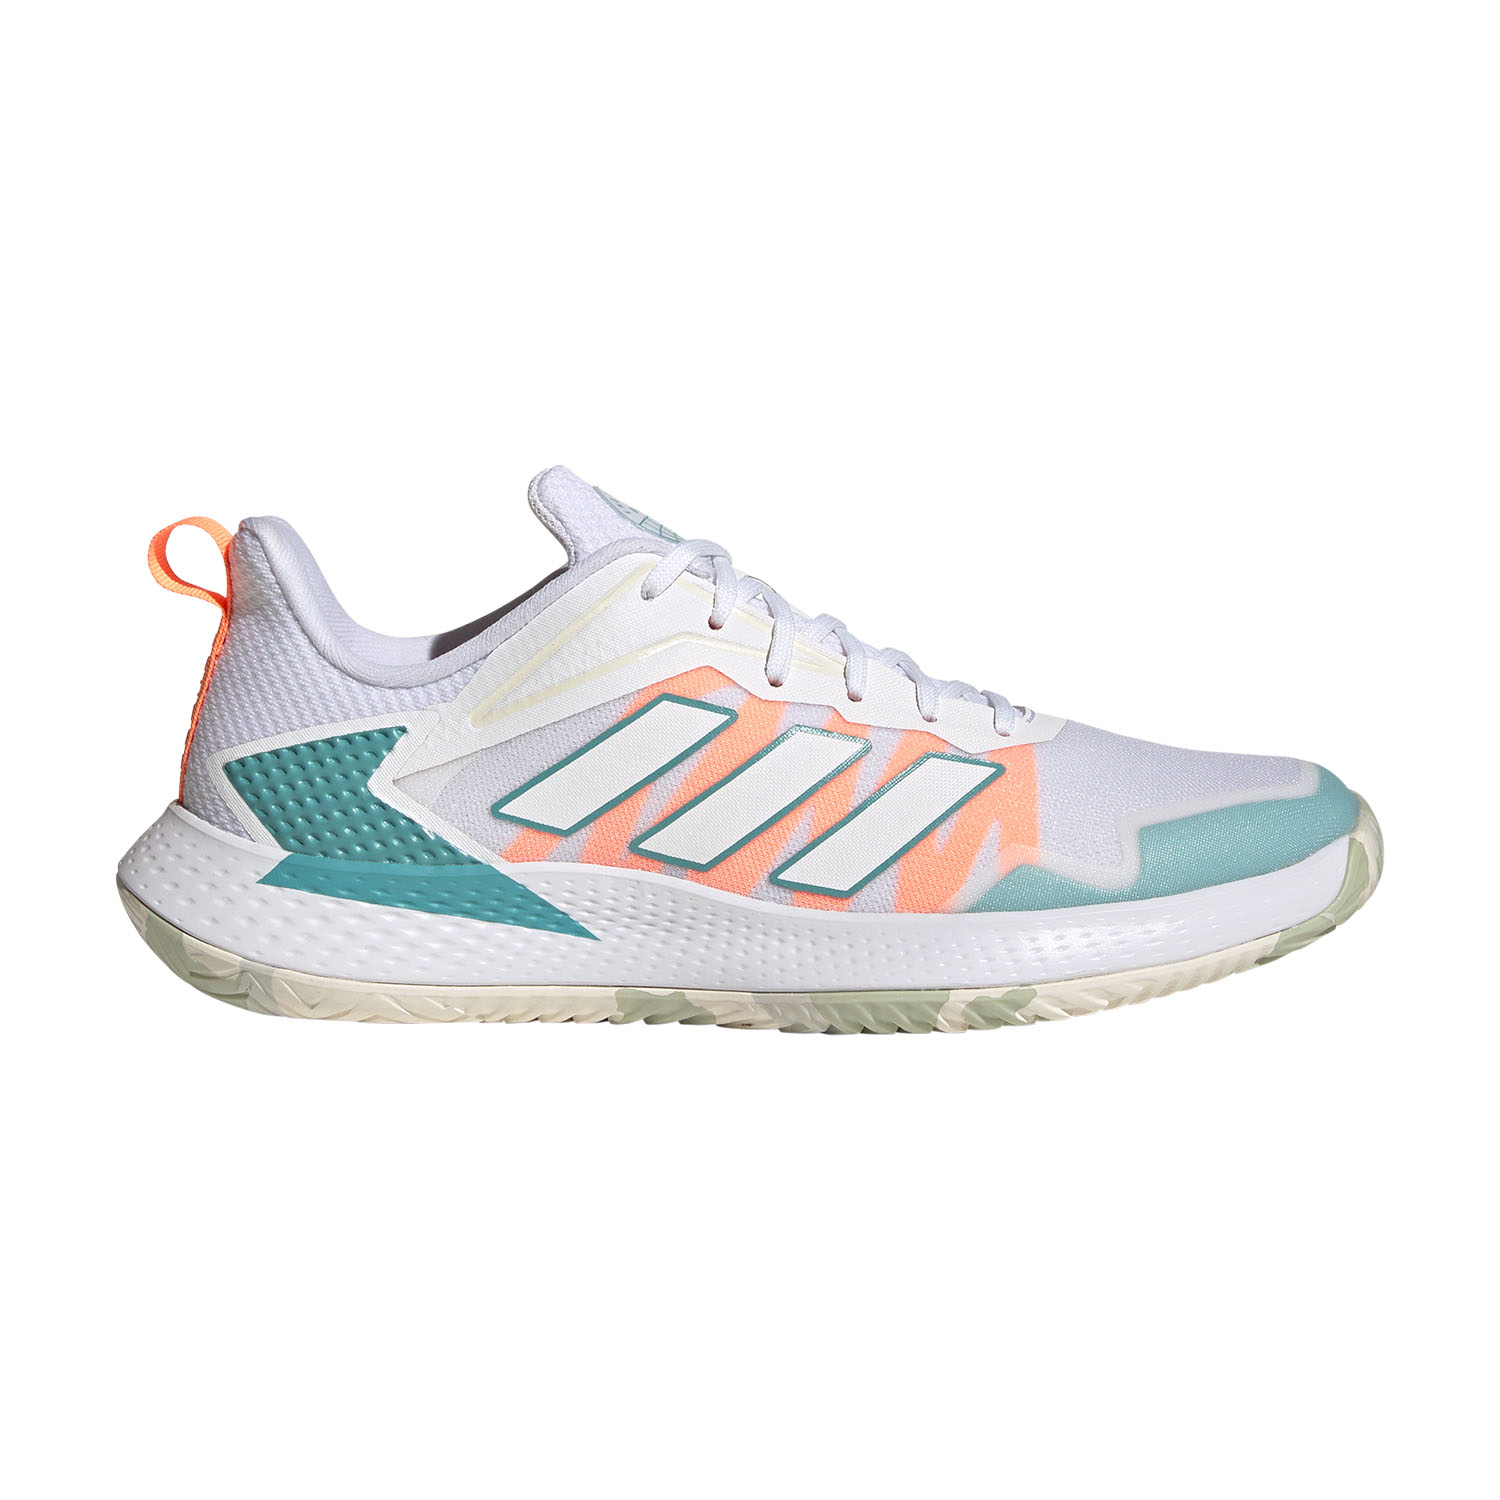 adidas Defiant Speed Woman's Tennis Shoes - White/Lilac